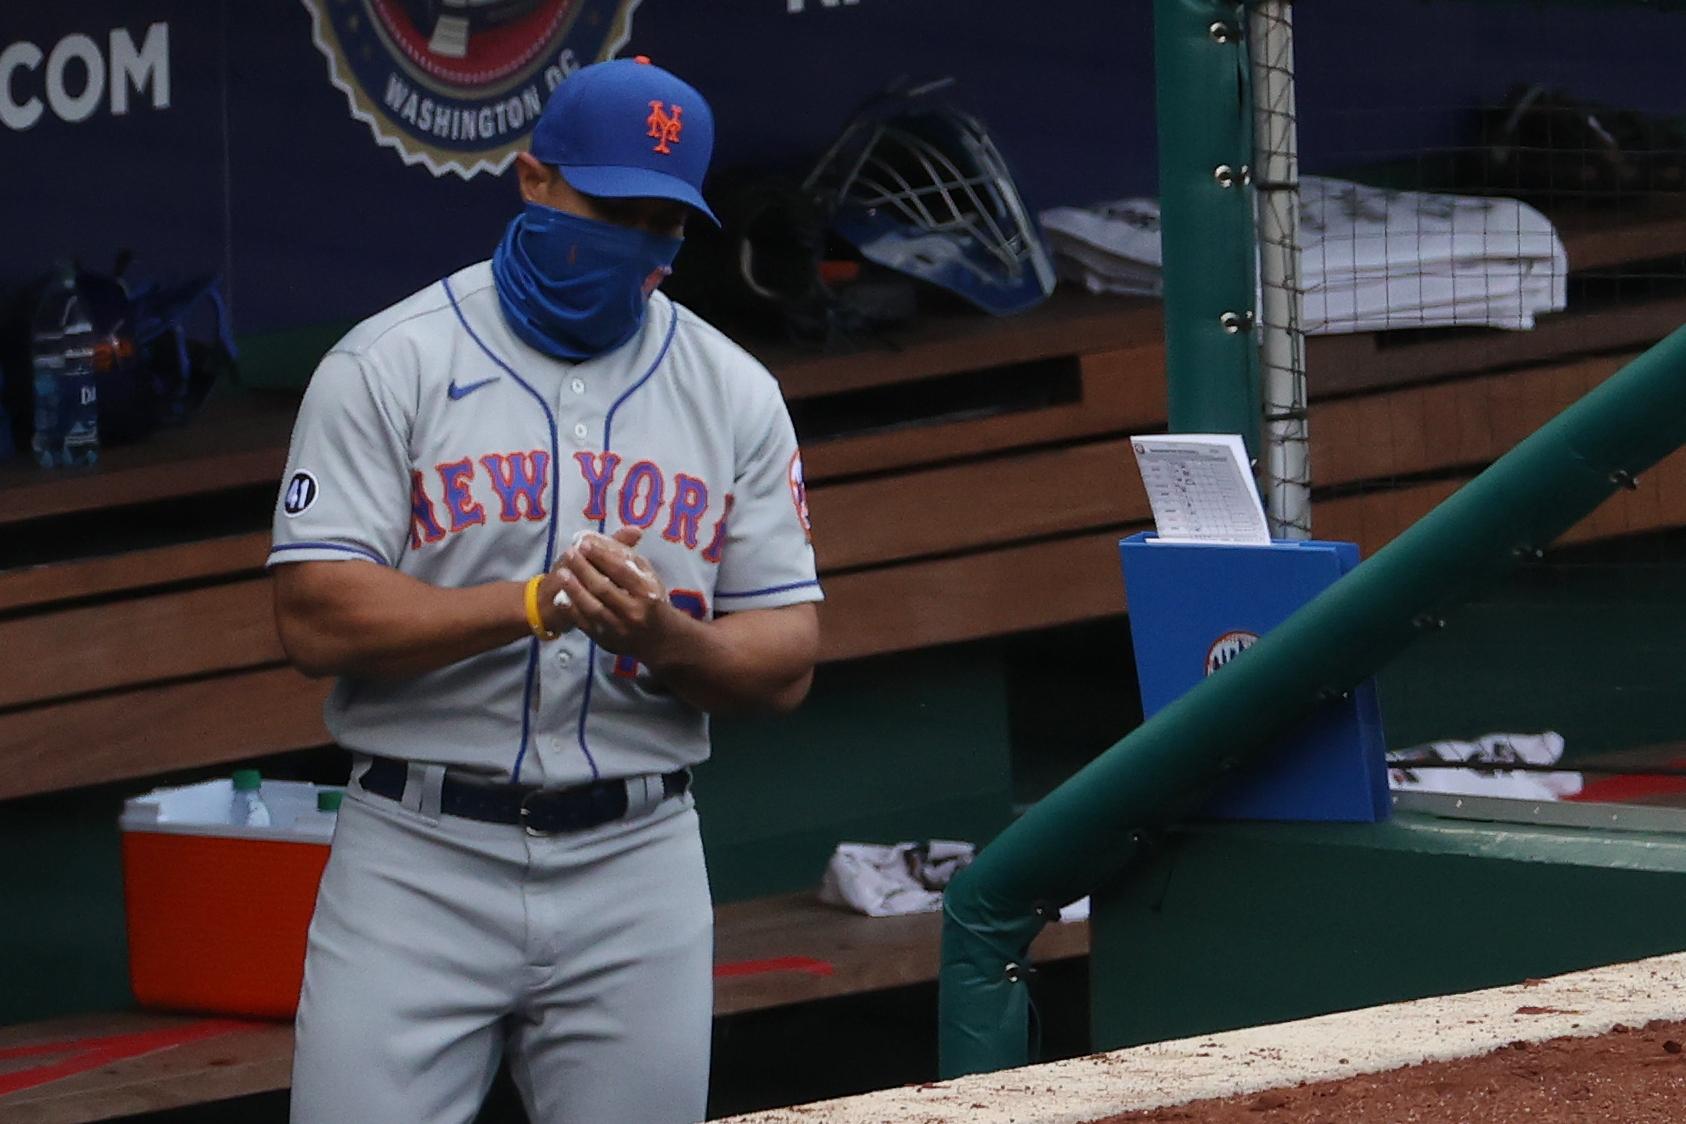 Sep 27, 2020; Washington, District of Columbia, USA; New York Mets manager Luis Rojas (19) uses hand sanitizer in the dugout after making a pitching change against the Washington Nationals in the second inning at Nationals Park / Geoff Burke-USA TODAY Sports